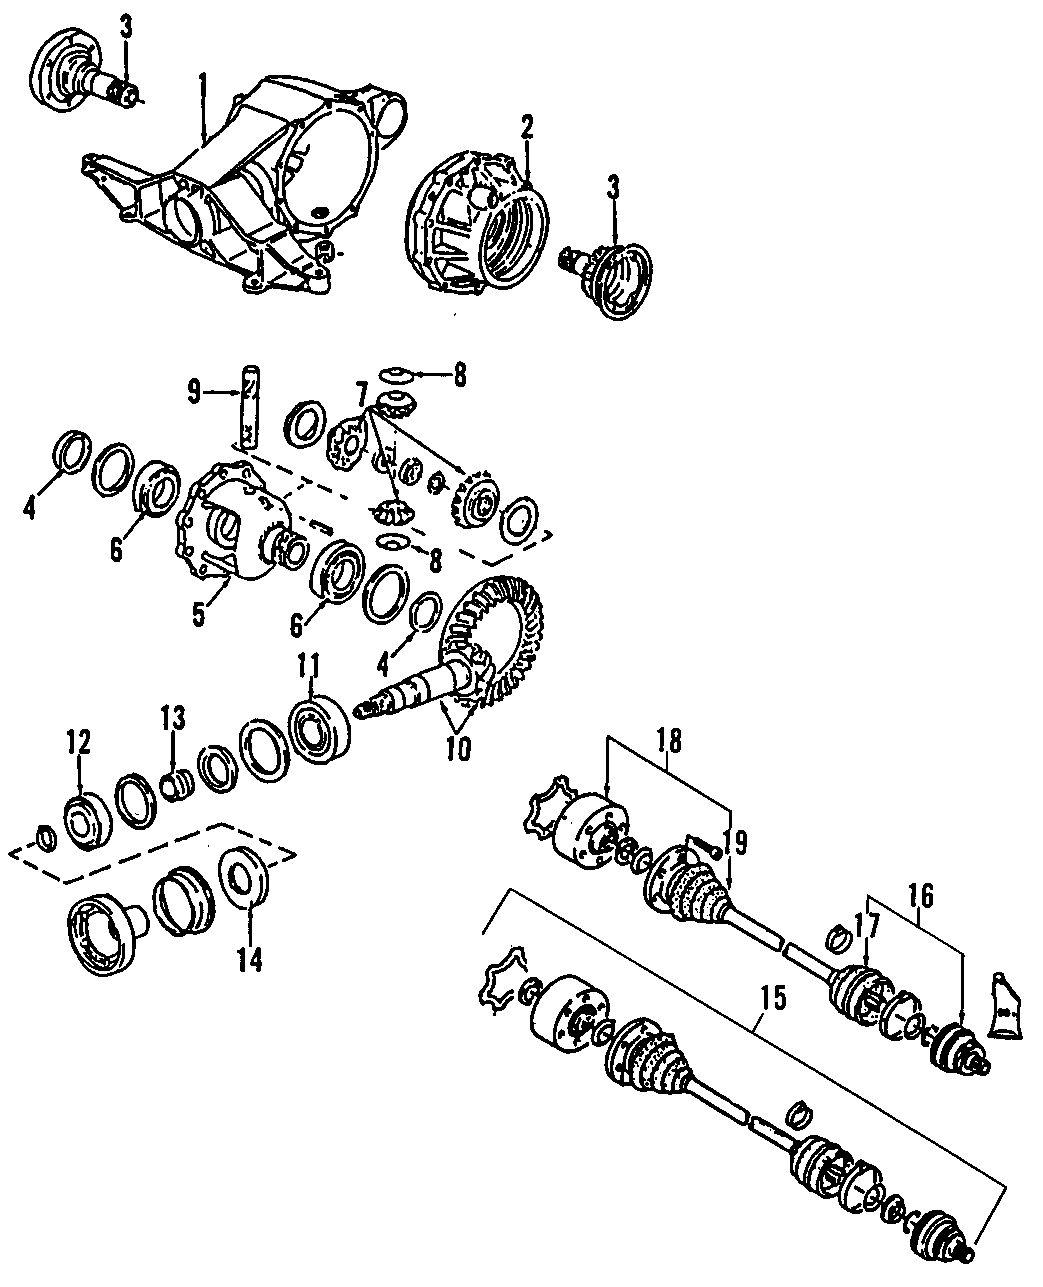 DRIVE AXLES. REAR AXLE. AXLE SHAFTS & JOINTS. DIFFERENTIAL. PROPELLER SHAFT.https://images.simplepart.com/images/parts/motor/fullsize/F220090.png